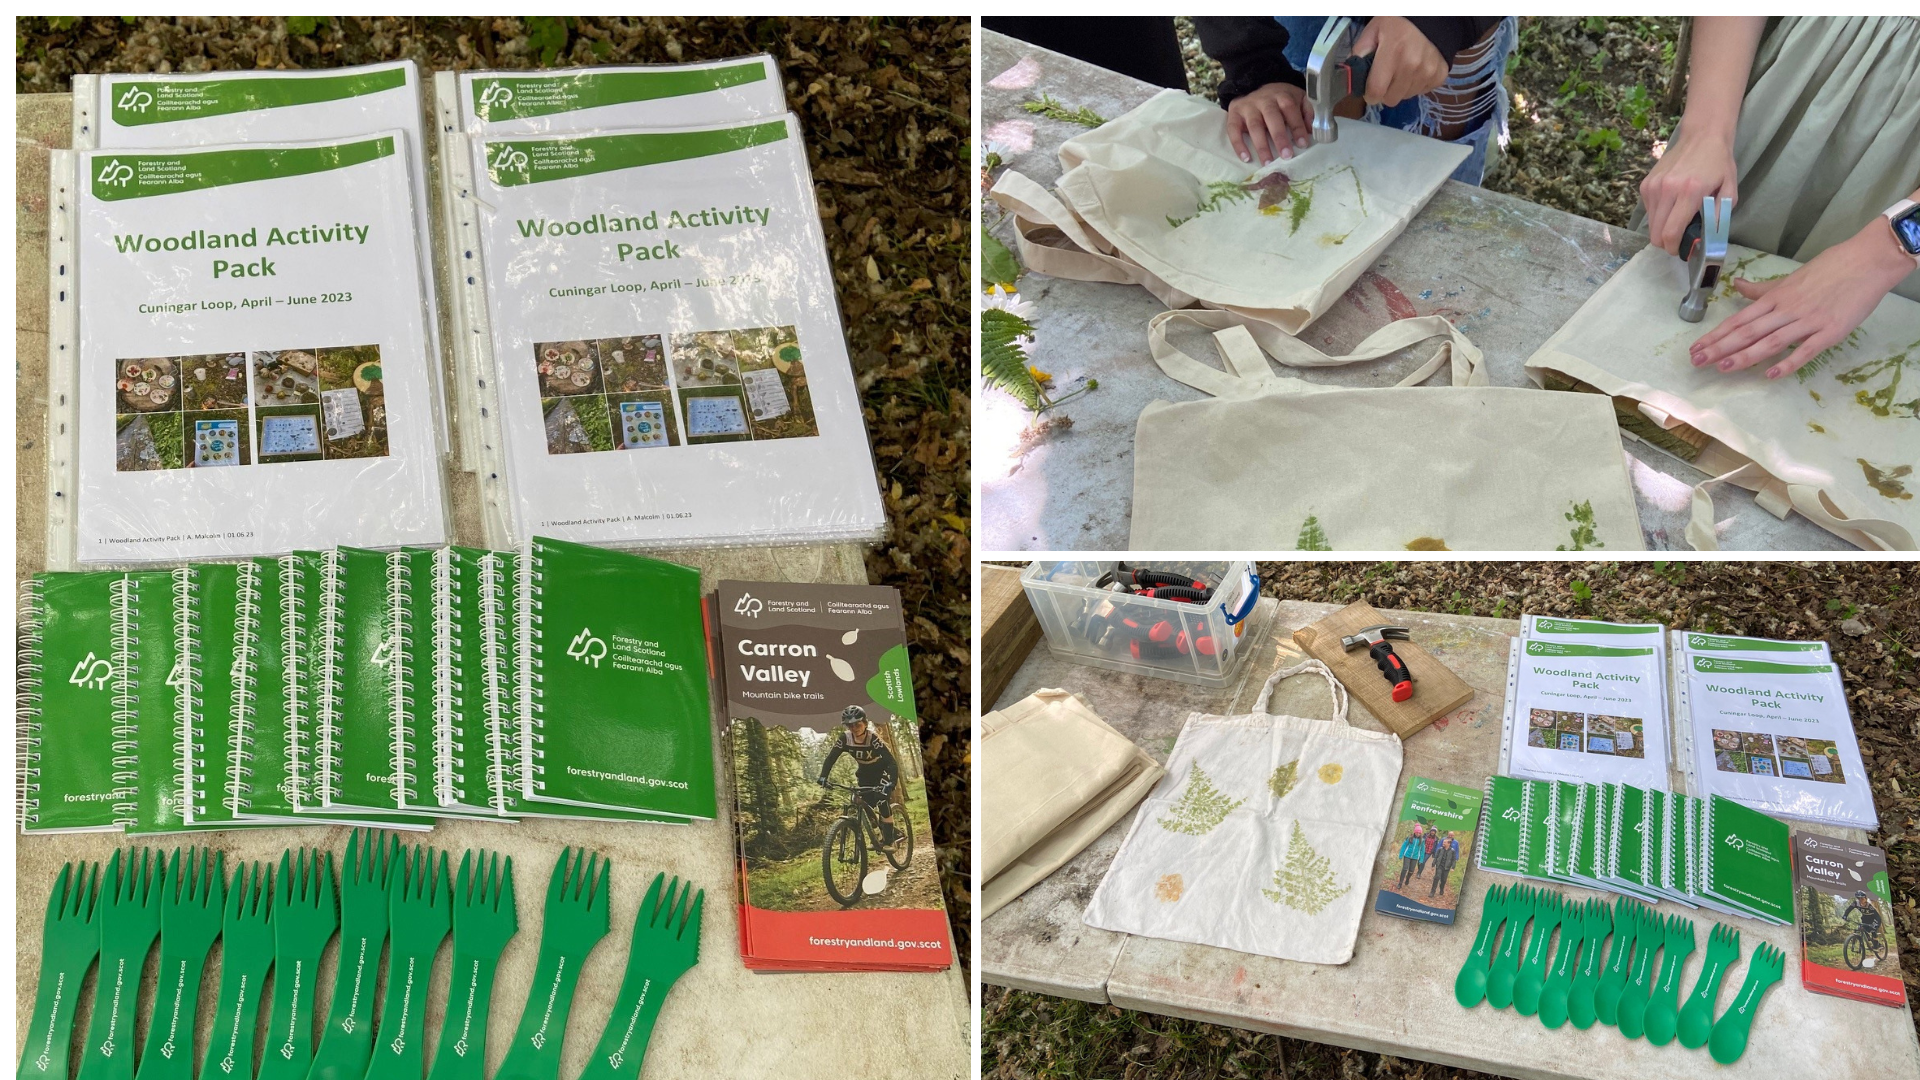 A collage. On the left, a table with Forestry and Land Scotland branded sporks, notepads, leaflets and activity booklets. On the top right, a table where two people are hammering flowers onto canvas bags. On the bottom right, a wider shot of a table with Forestry and Land Scotland branded items and the canvas bags. 